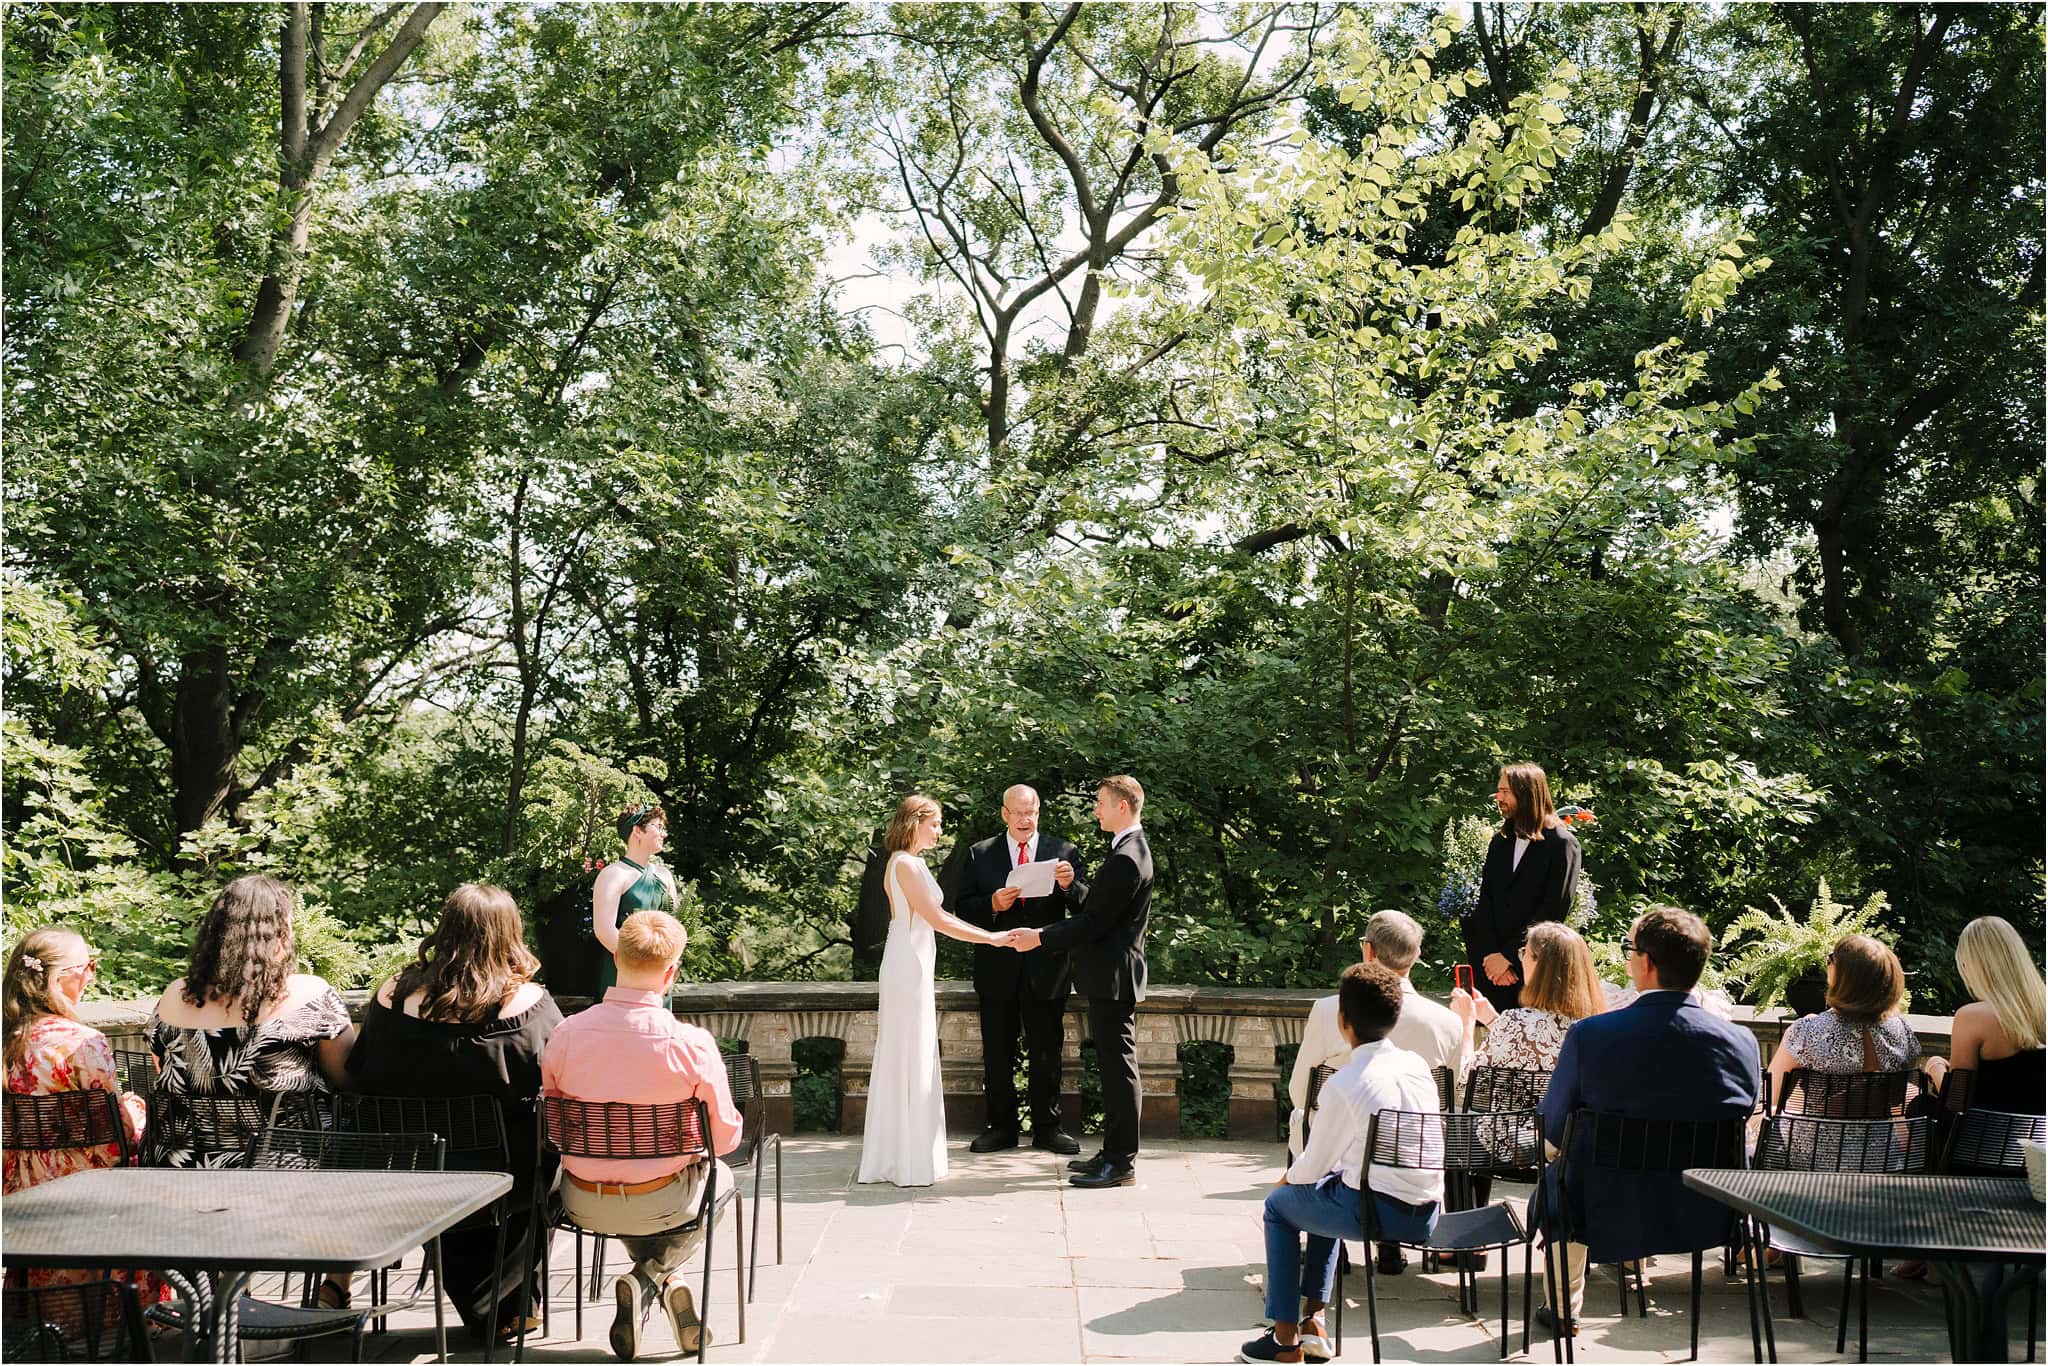 Arboretum Ceremony with Bride and groom in the Balcony